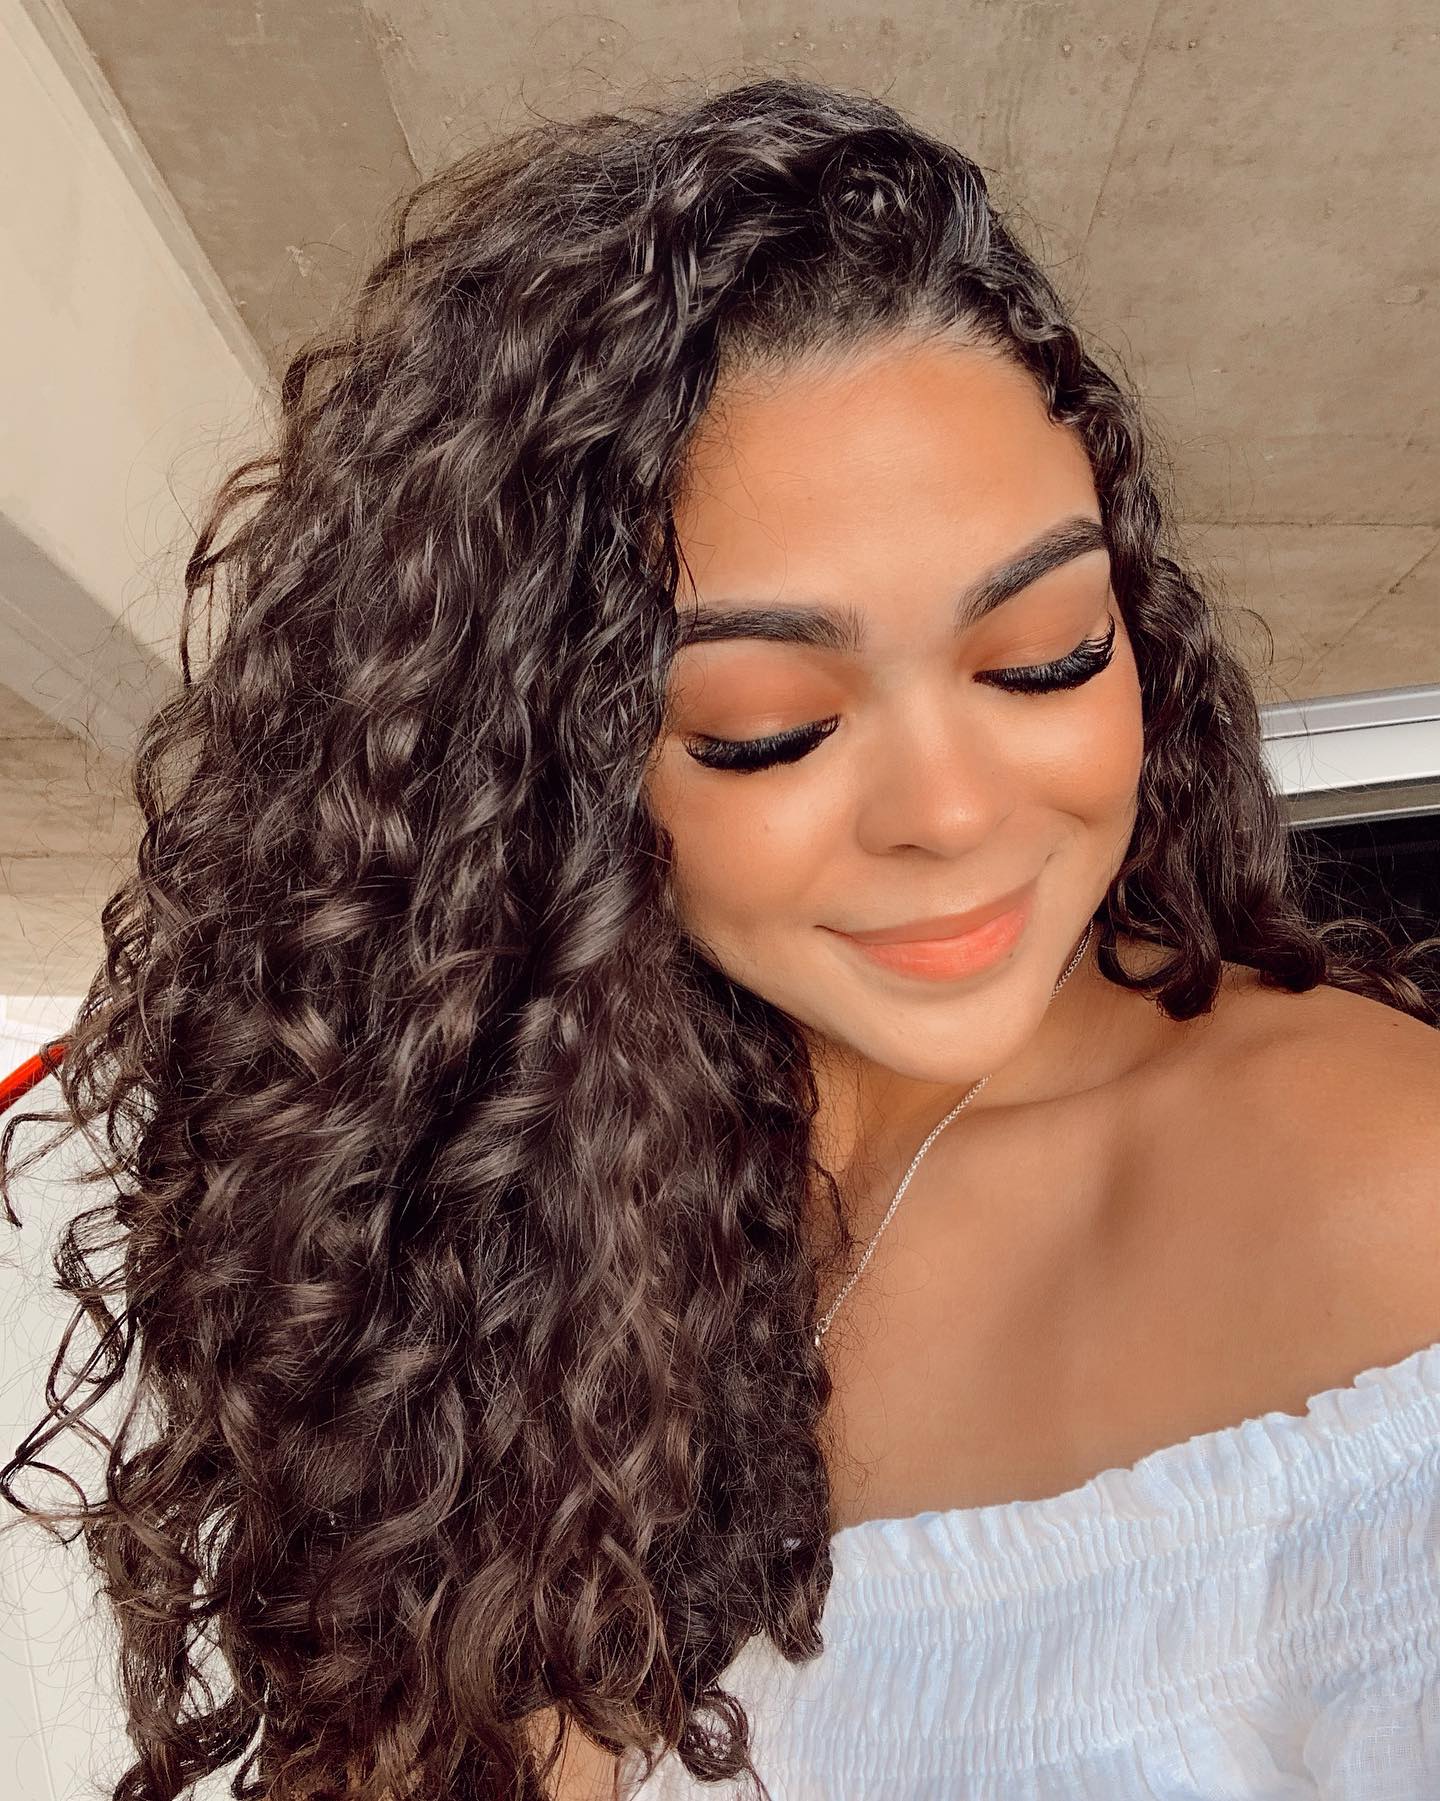 This one is for the girls who hate their natural hair. In middle school and even high school, I used to always brush out my curls or have my mom straighten my hair whenever she could because I wanted my hair to be straight, not curly. I felt like it was too puffy, always in the way, and overall a pain to manage (iykyk). Fast forward to now, my curls are the healthiest they’ve ever been and you hardly ever see me with my hair straightened all because I learned to embrace what I have 🤍 A lot can change in a year with the right products and some patience :)